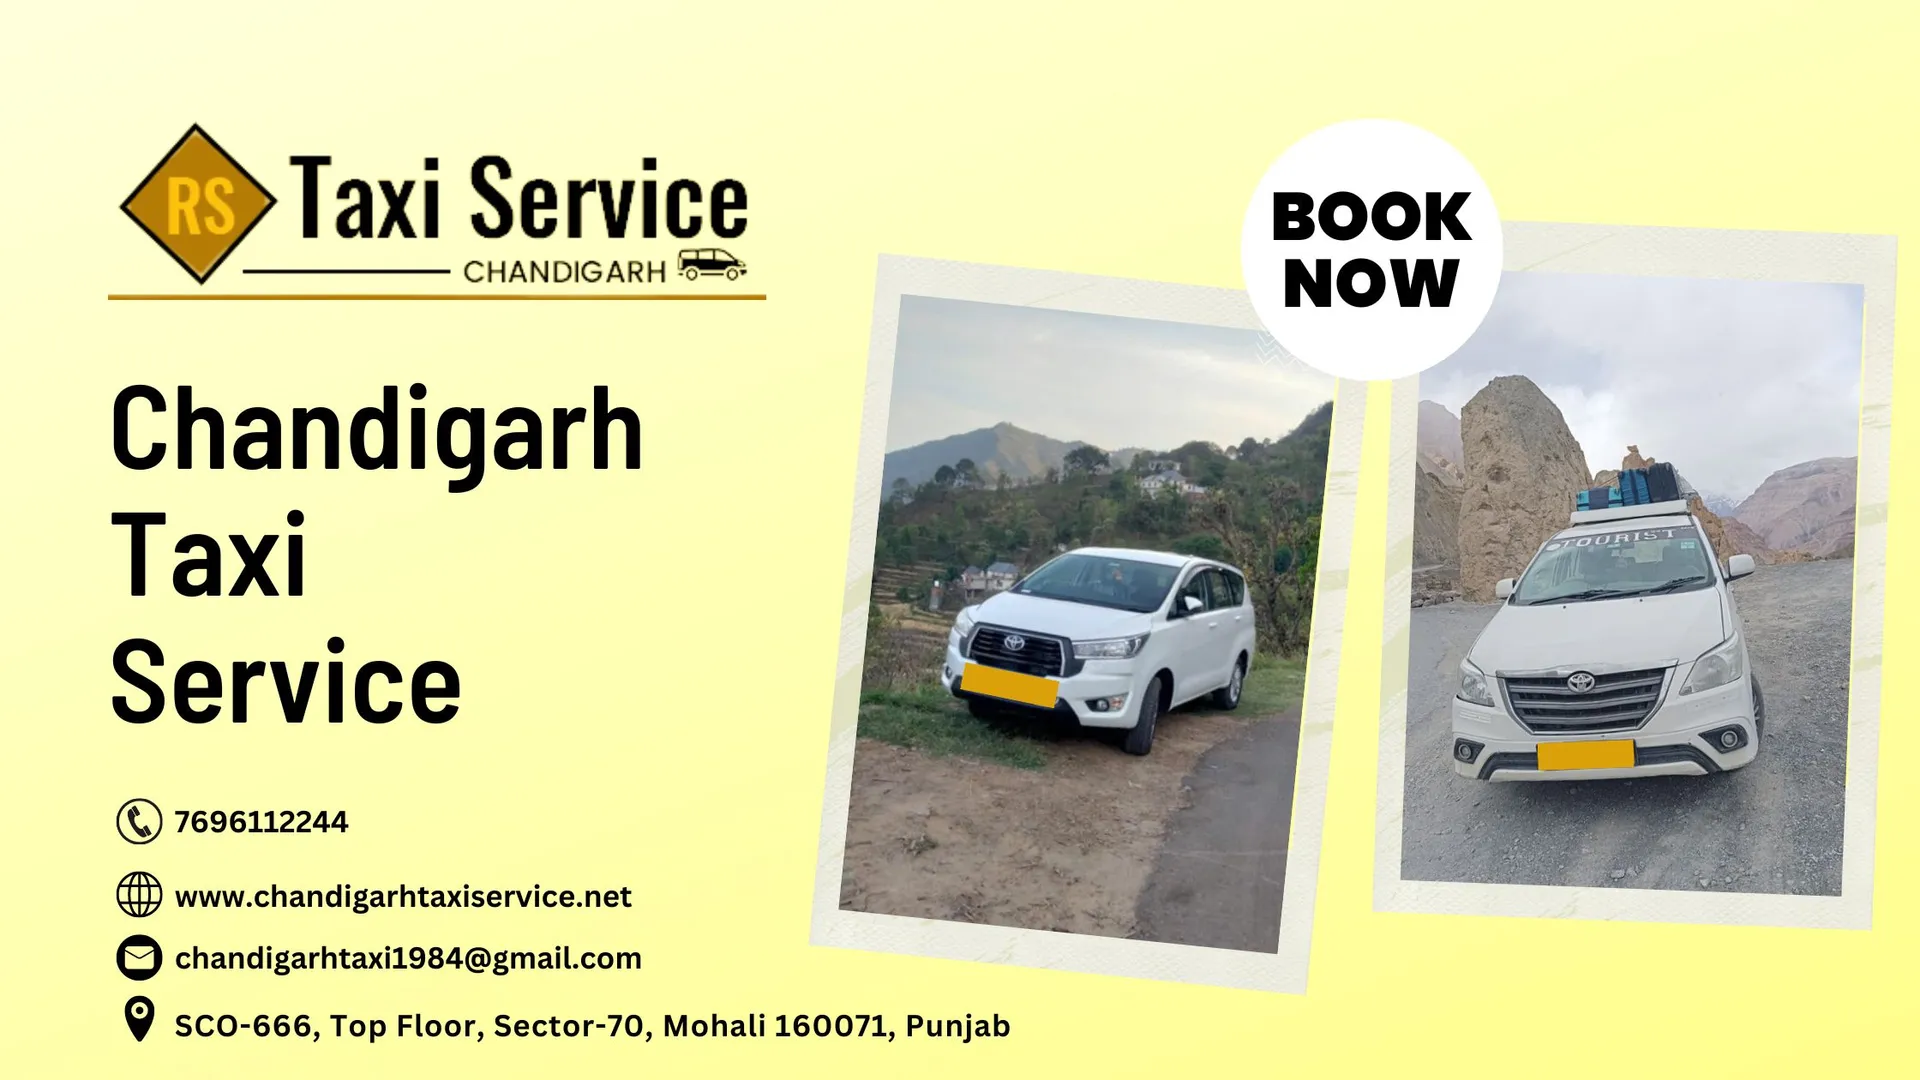 Welcome to RS Taxi Service Chandigarh! We take pride in offering top-notch taxi services in the beautiful city of Chandigarh and its surroundings. With a commitment to reliability, safety, and comfort, we are your go-to choice for all your transportation needs.

Our fleet consists of a variety of well-maintained vehicles, driven by professional and courteous drivers who prioritize your convenience and satisfaction. Visit now. https://www.chandigarhtaxiservice.net/